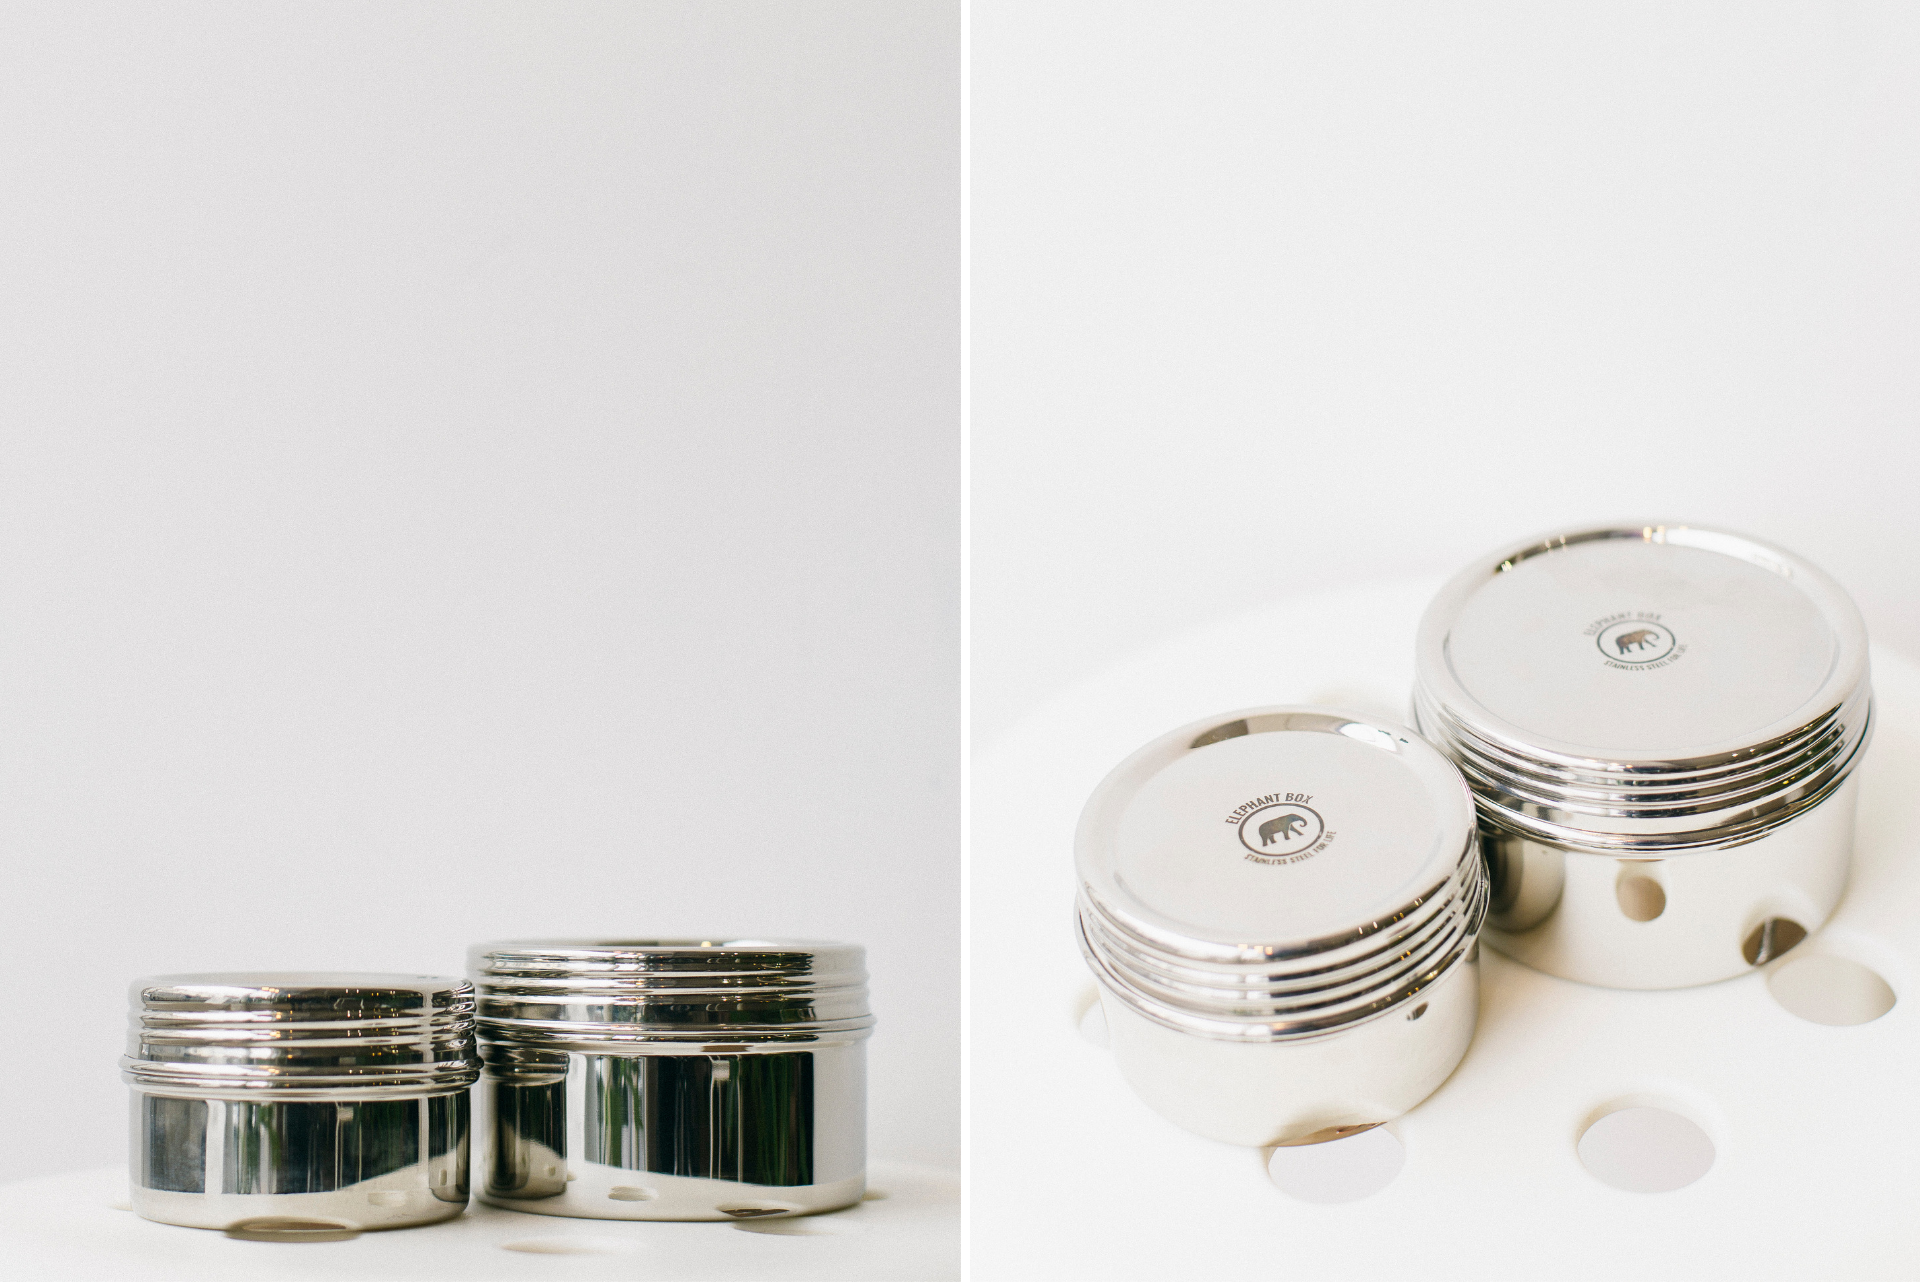 Elephant Box plastic-free reusable food canisters. Small and large canisters. Stainless steel food canisters.